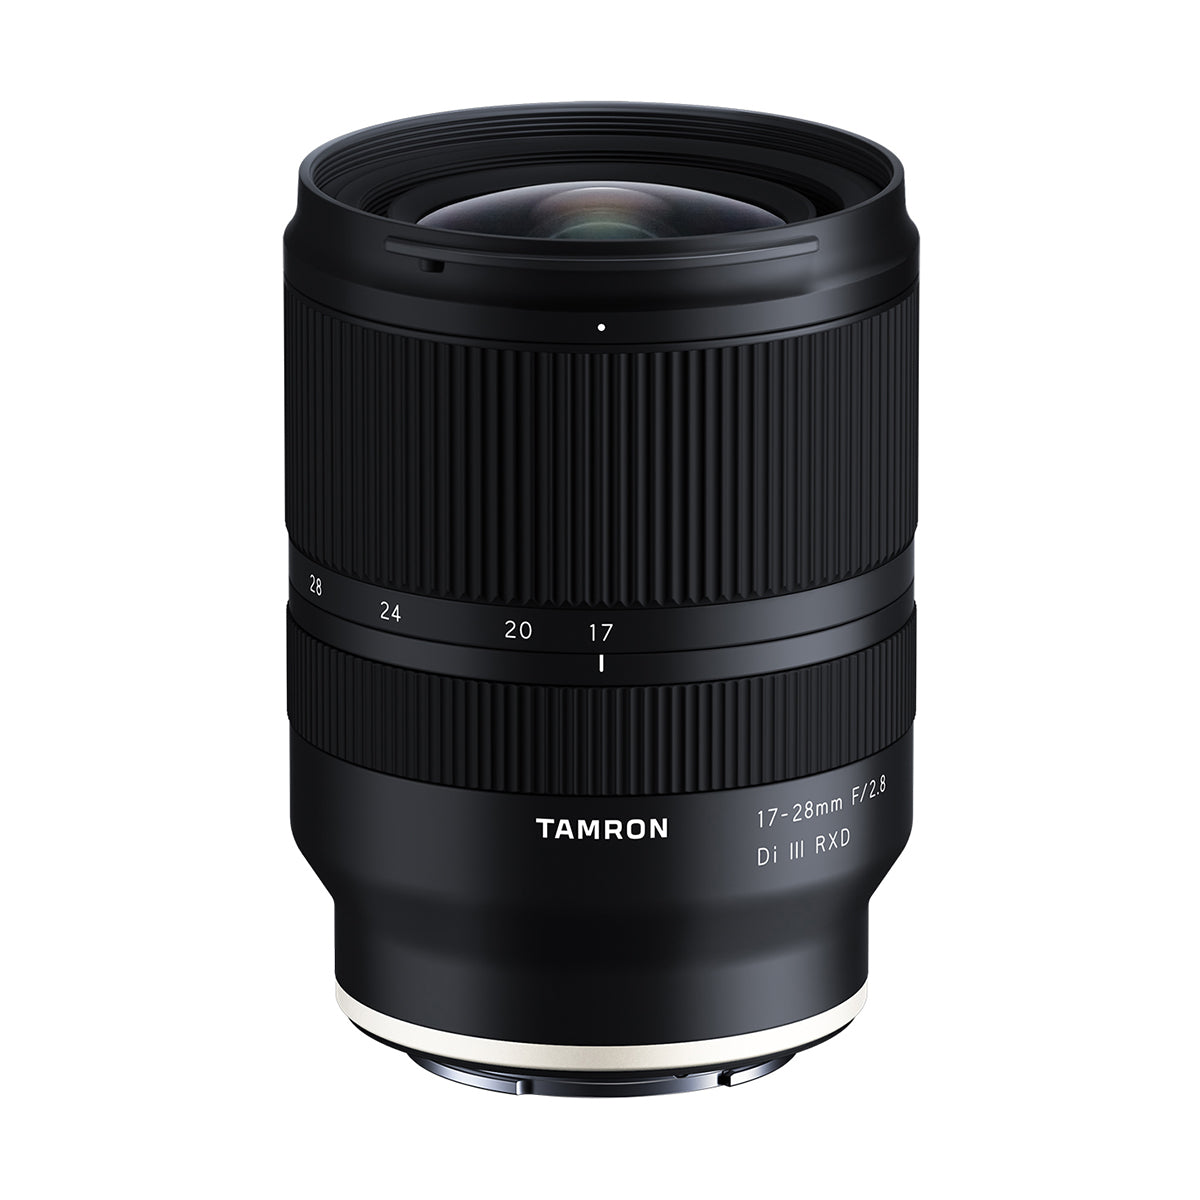 Tamron 17-28mm f/2.8 Di III RXD Lens for Sony FE